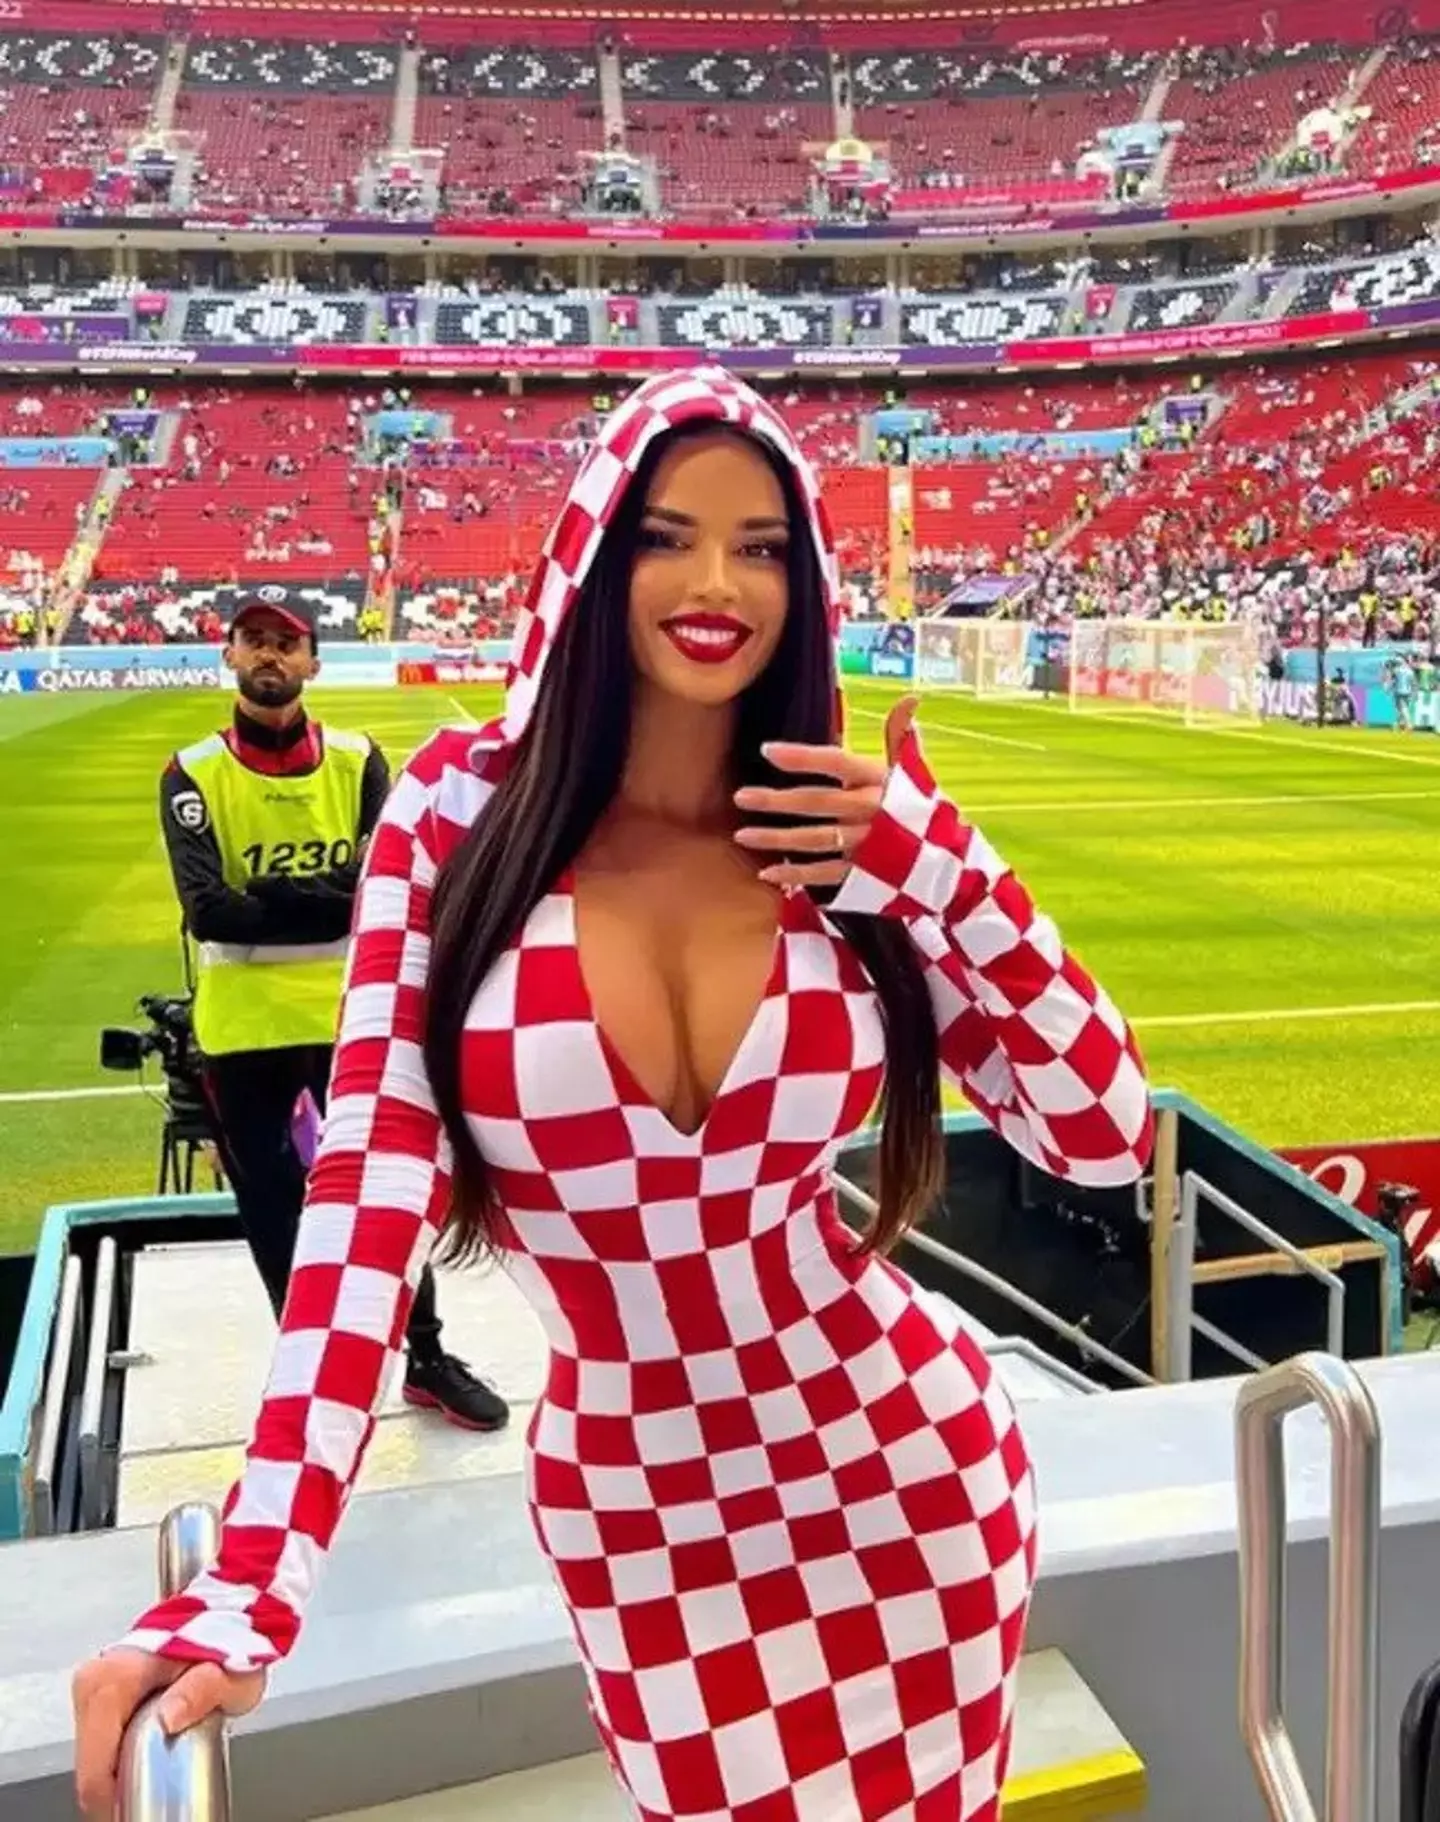 Former Miss Croatia has said she will go naked if her country wins the World Cup.